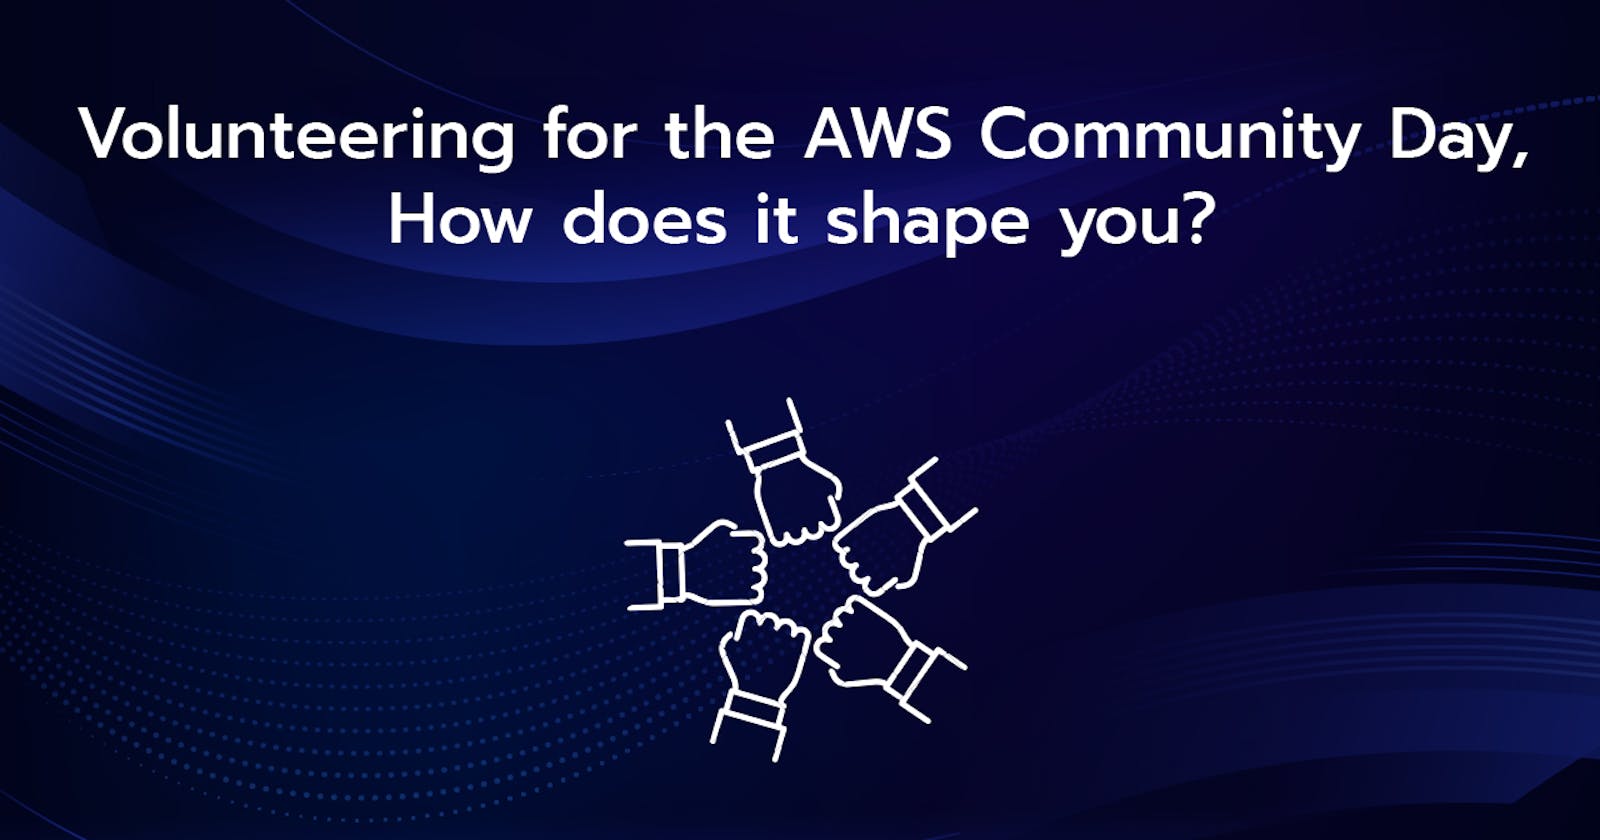 Volunteering for the AWS Community Day, How does it shape you?Volunteering for the AWS Community Day, How does it shape you?